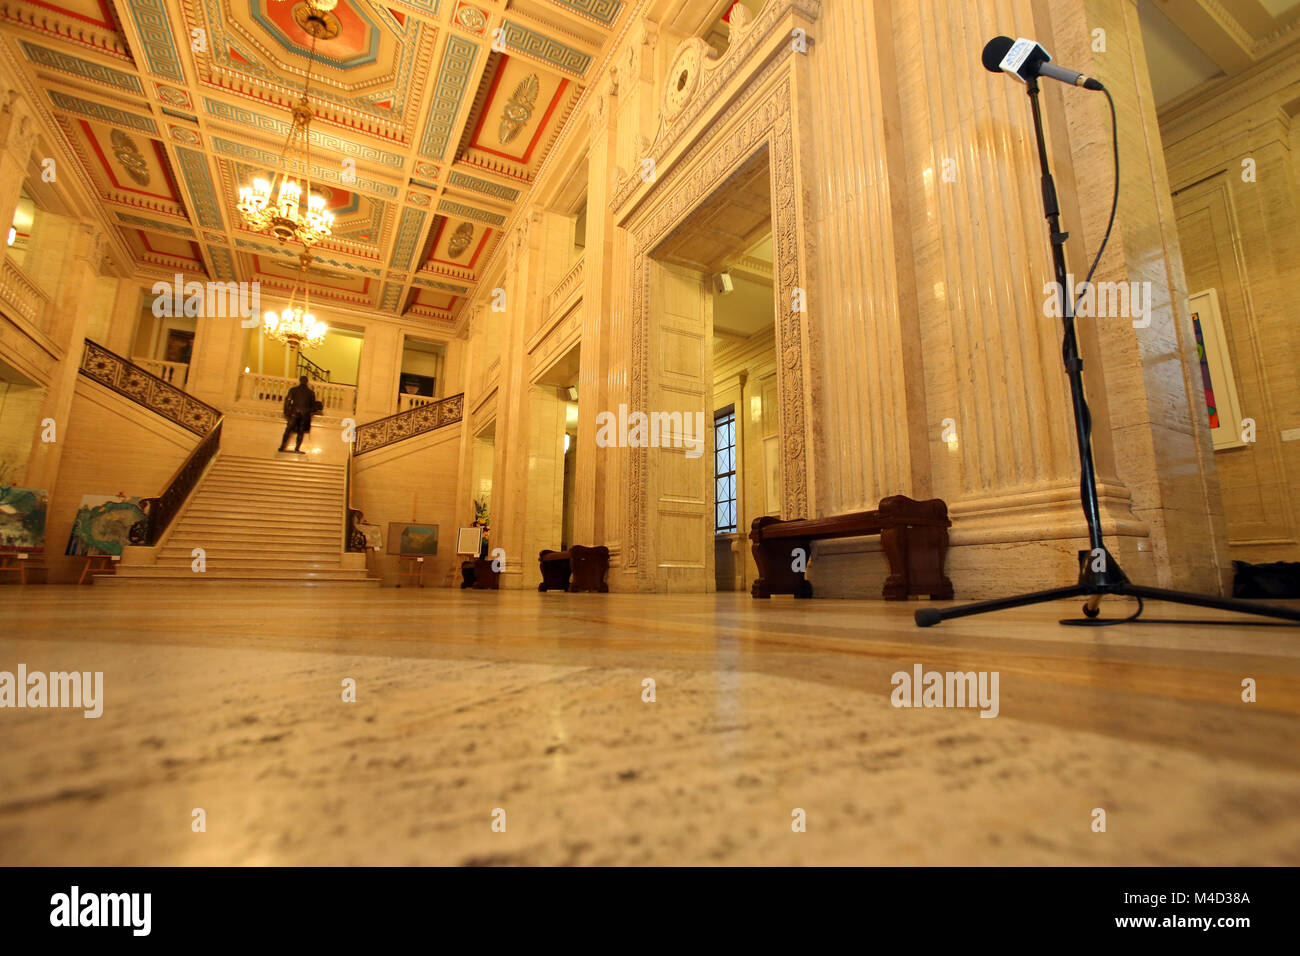 The Great Hall at Stormont,  Belfast, Monday, Feb 12th, 2018. Britain's Prime Minister Theresa May and Irish Prime Minister Leo Varadkar are to visit Belfast later for talks with the Stormont parties. The Prime Ministers left without a deal to restore devolved government. Photo/Paul McErlane Stock Photo